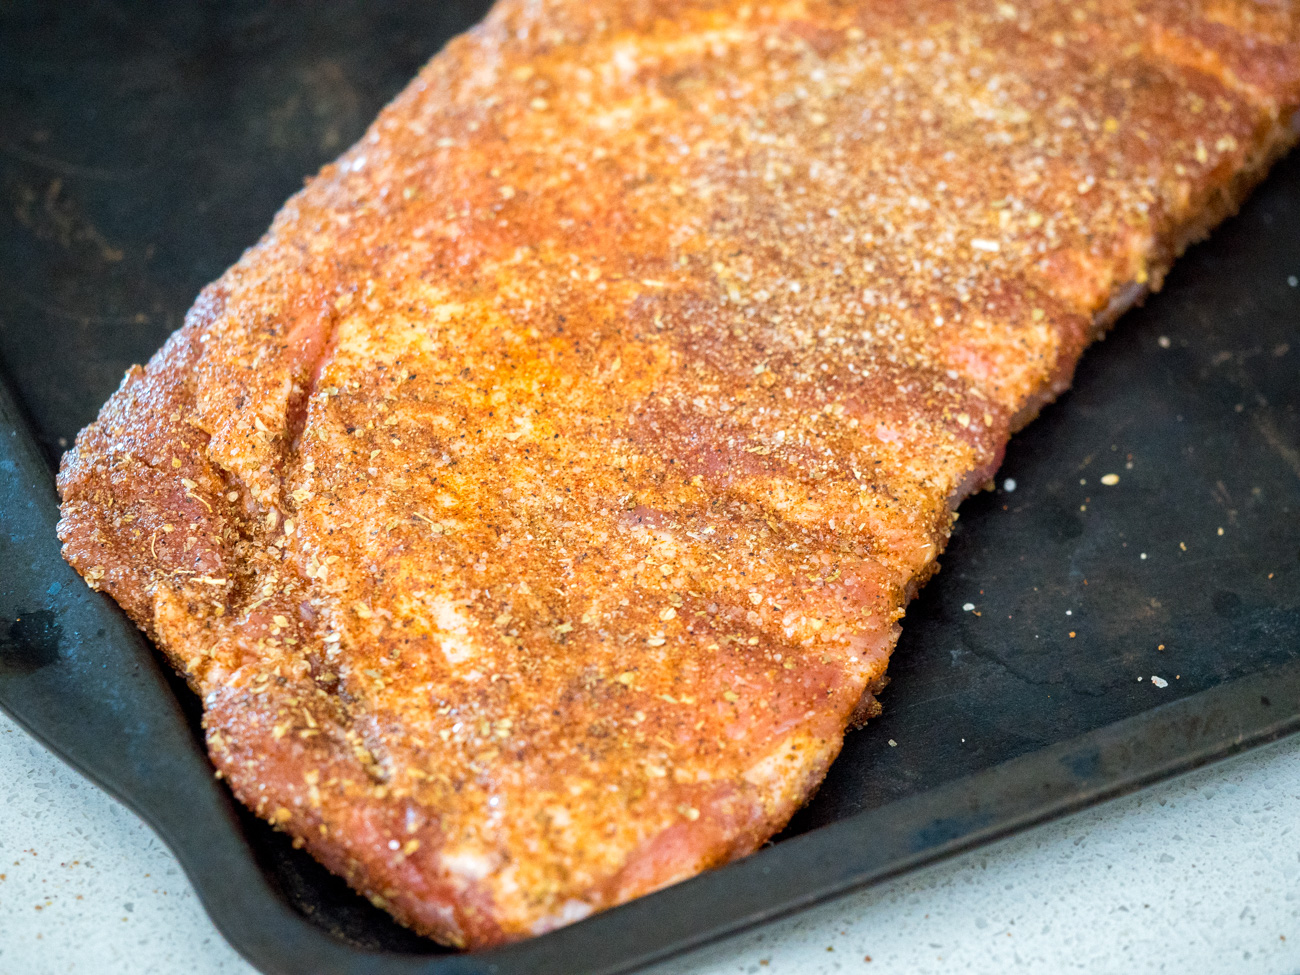 preparing Slow Cooker St. Louis Style Ribs